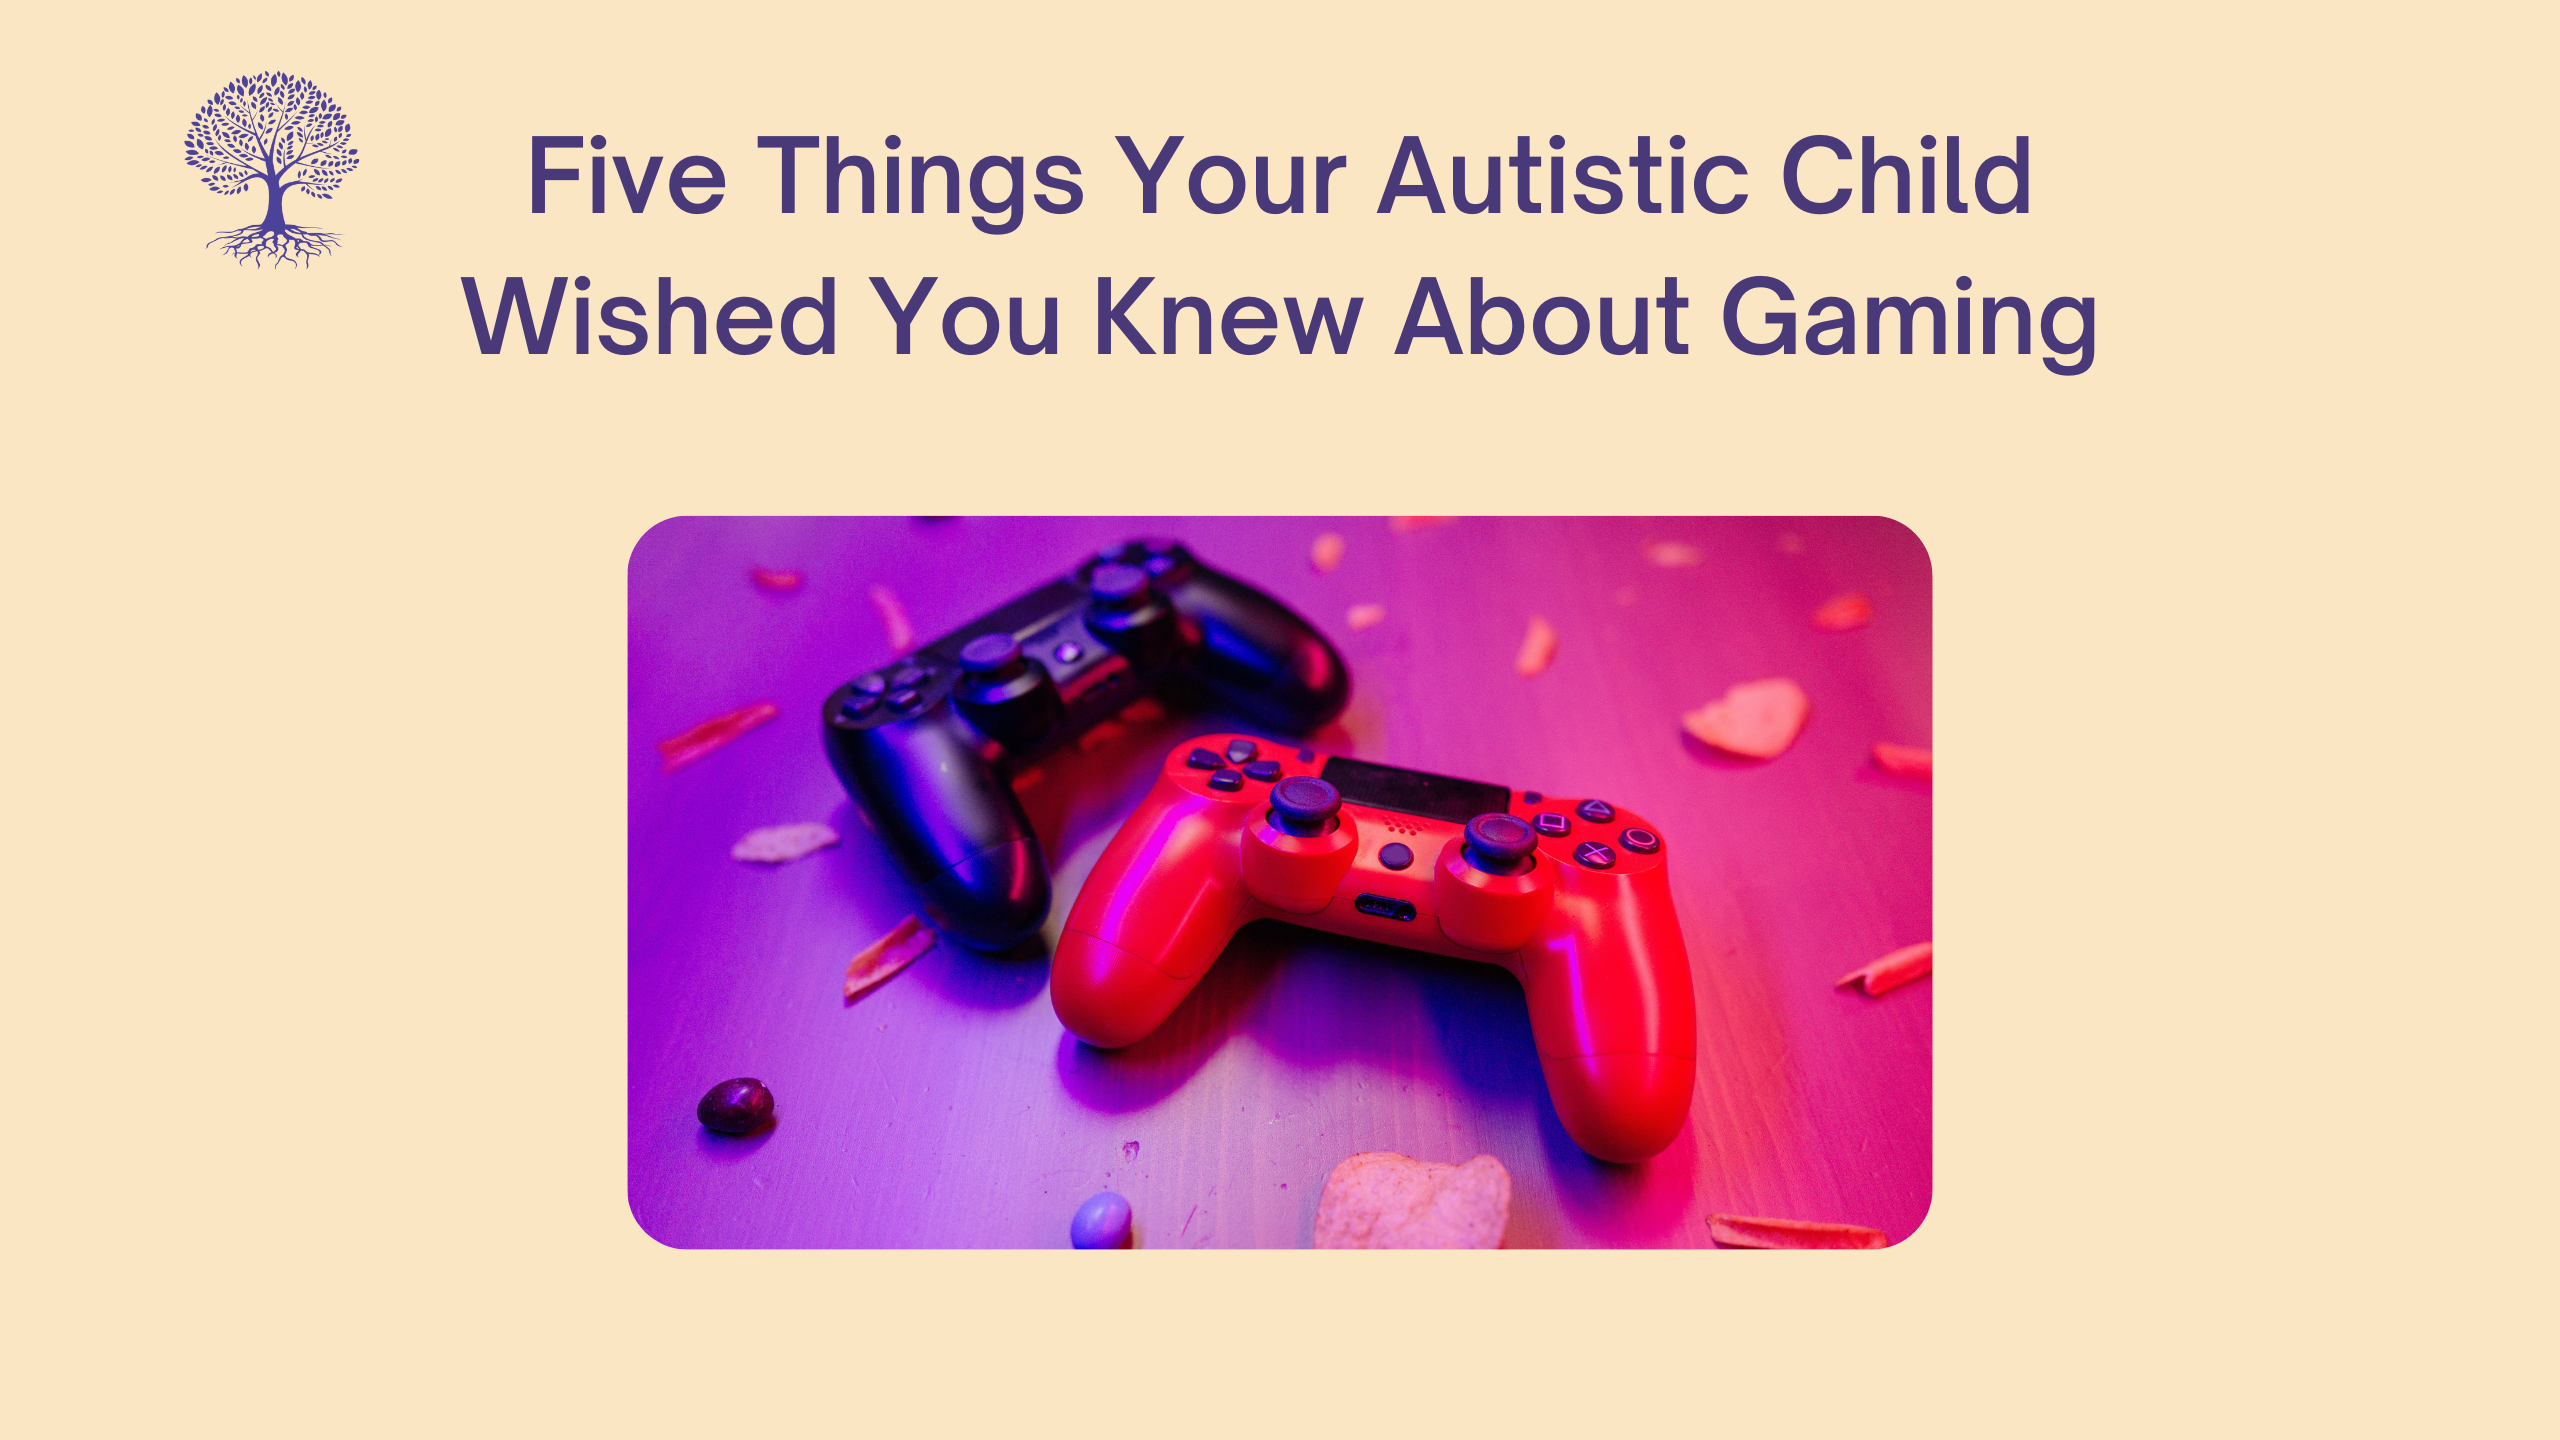 Five Things your Autistic Child Wished You Knew About Gaming